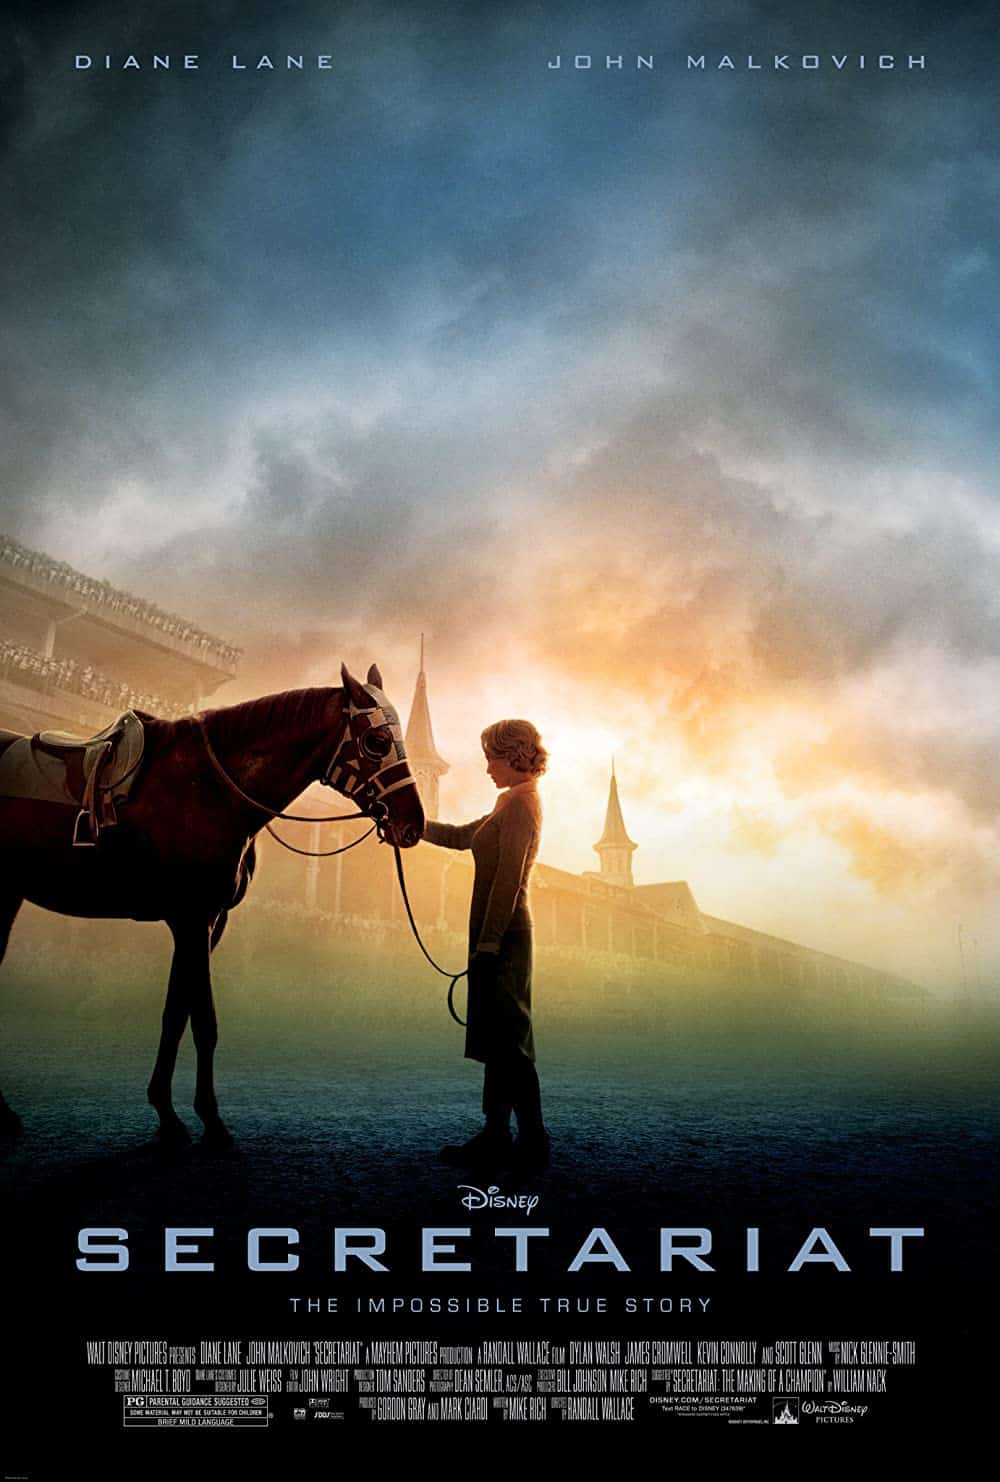 Secretariat (2010) Best Horse Racing Movies to Feel The Life